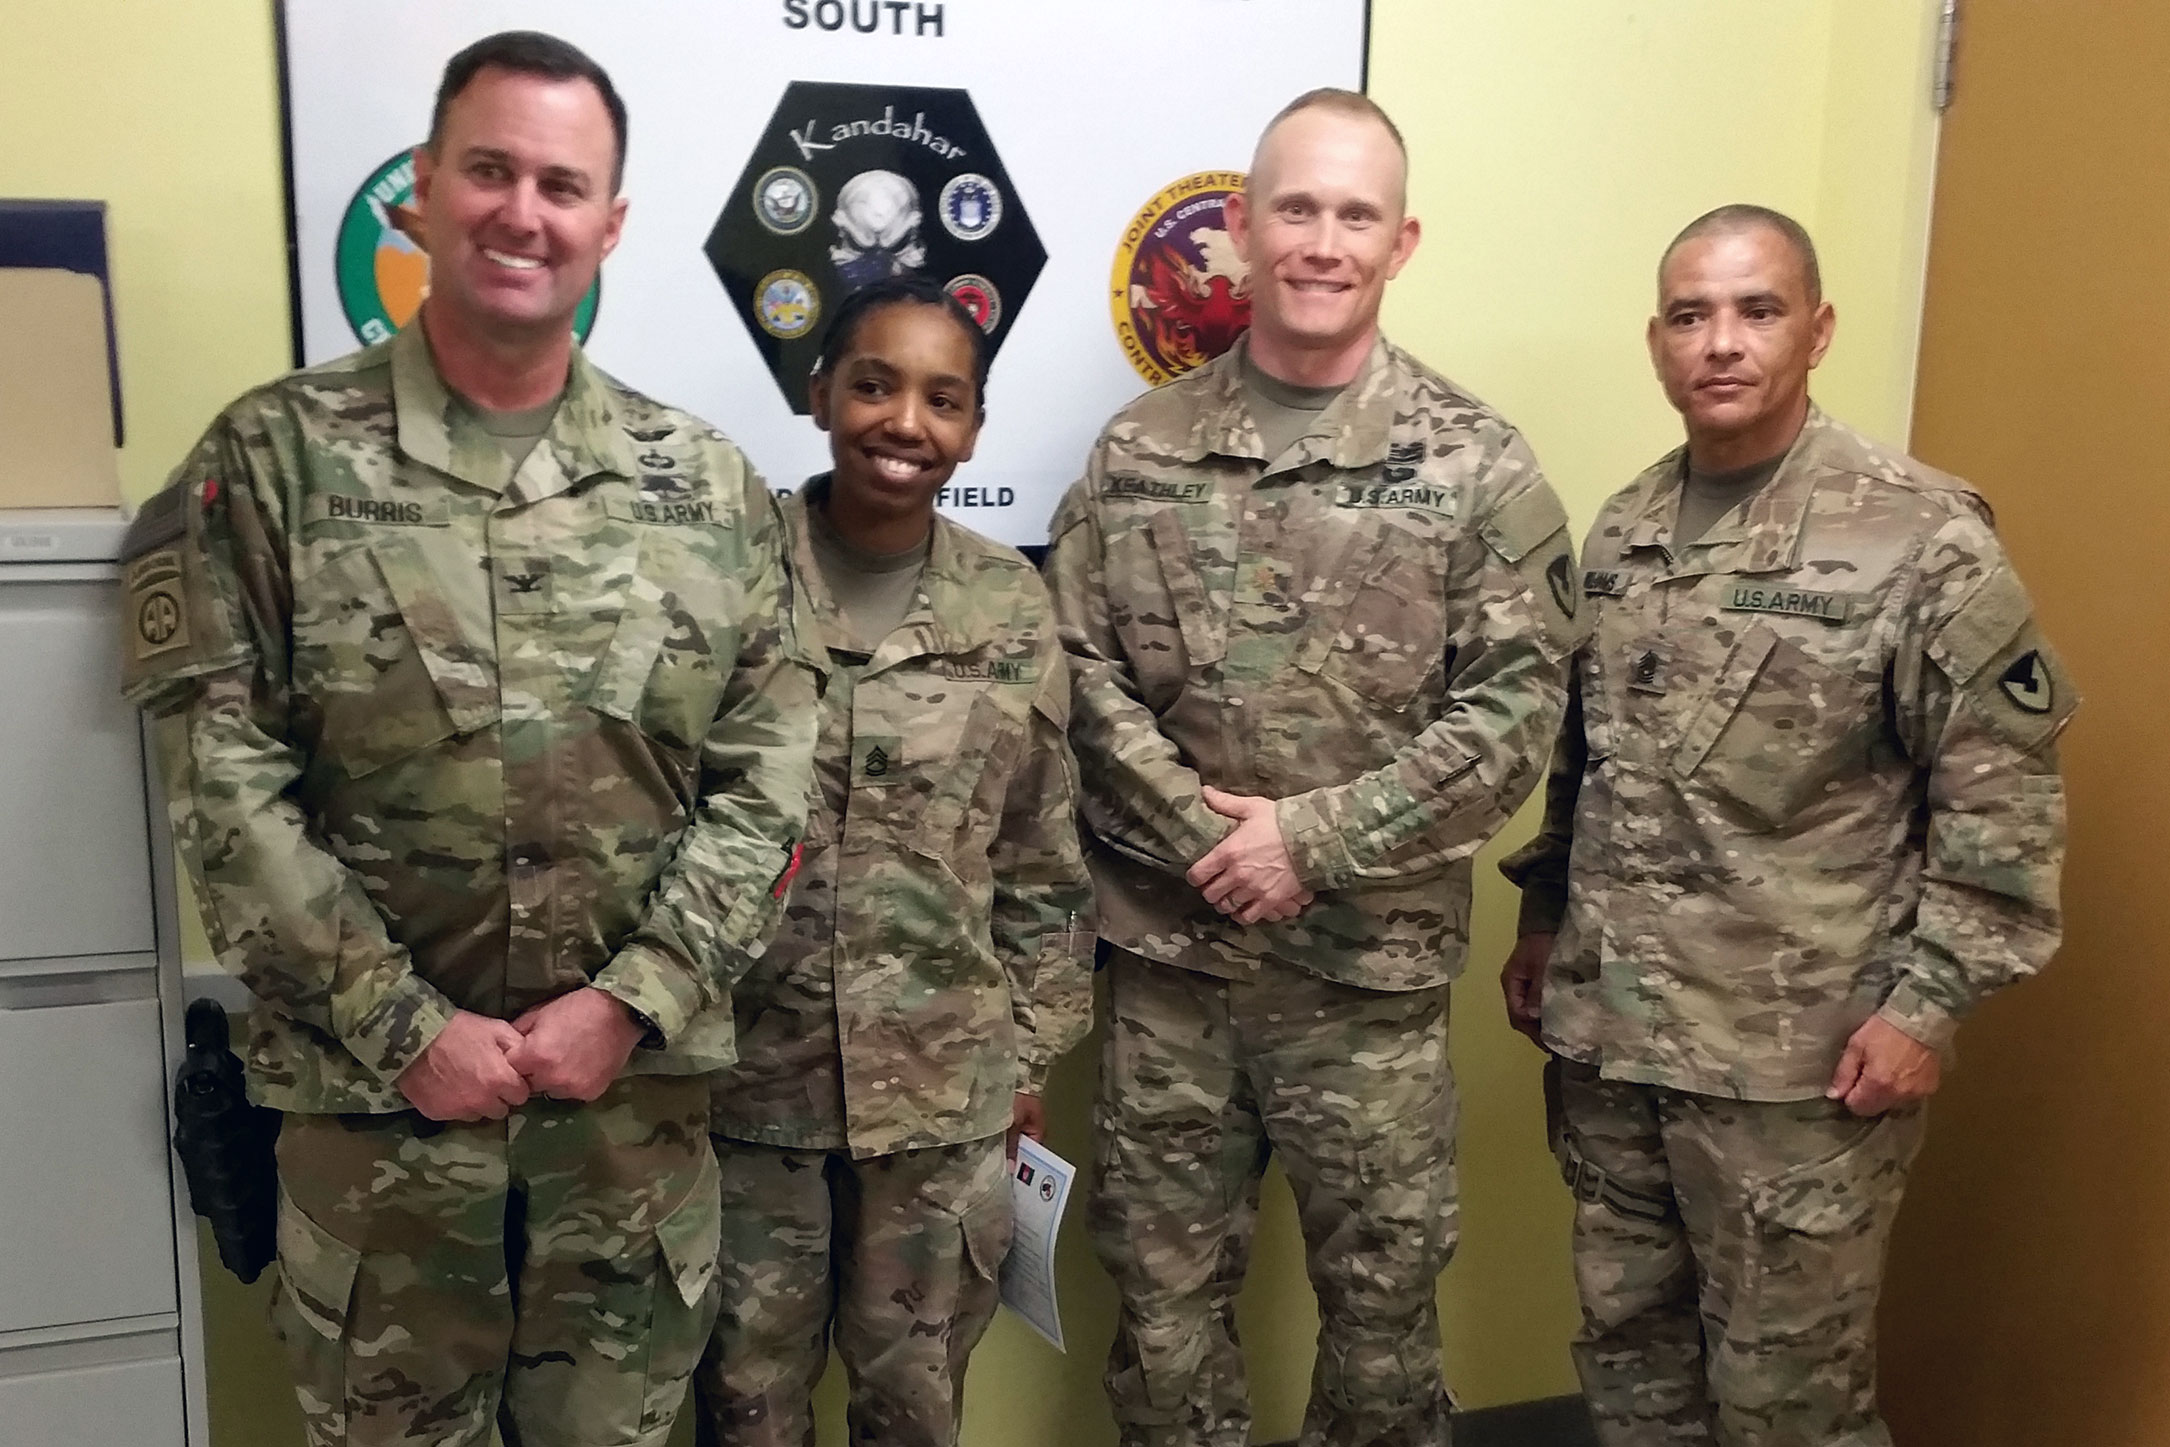 Left to right, Col. Joshua Burris, Expeditionary Contracting Command – Afghanistan commander; Sgt. 1st Class Katrina Tolbert, noncommissioned officer in charge for RCO-S; the author; and Command Sgt. Maj. Charles Williams. (U.S. Army photo by Staff Sgt. Jeremy Kinney, 410th Contracting Support Battalion)